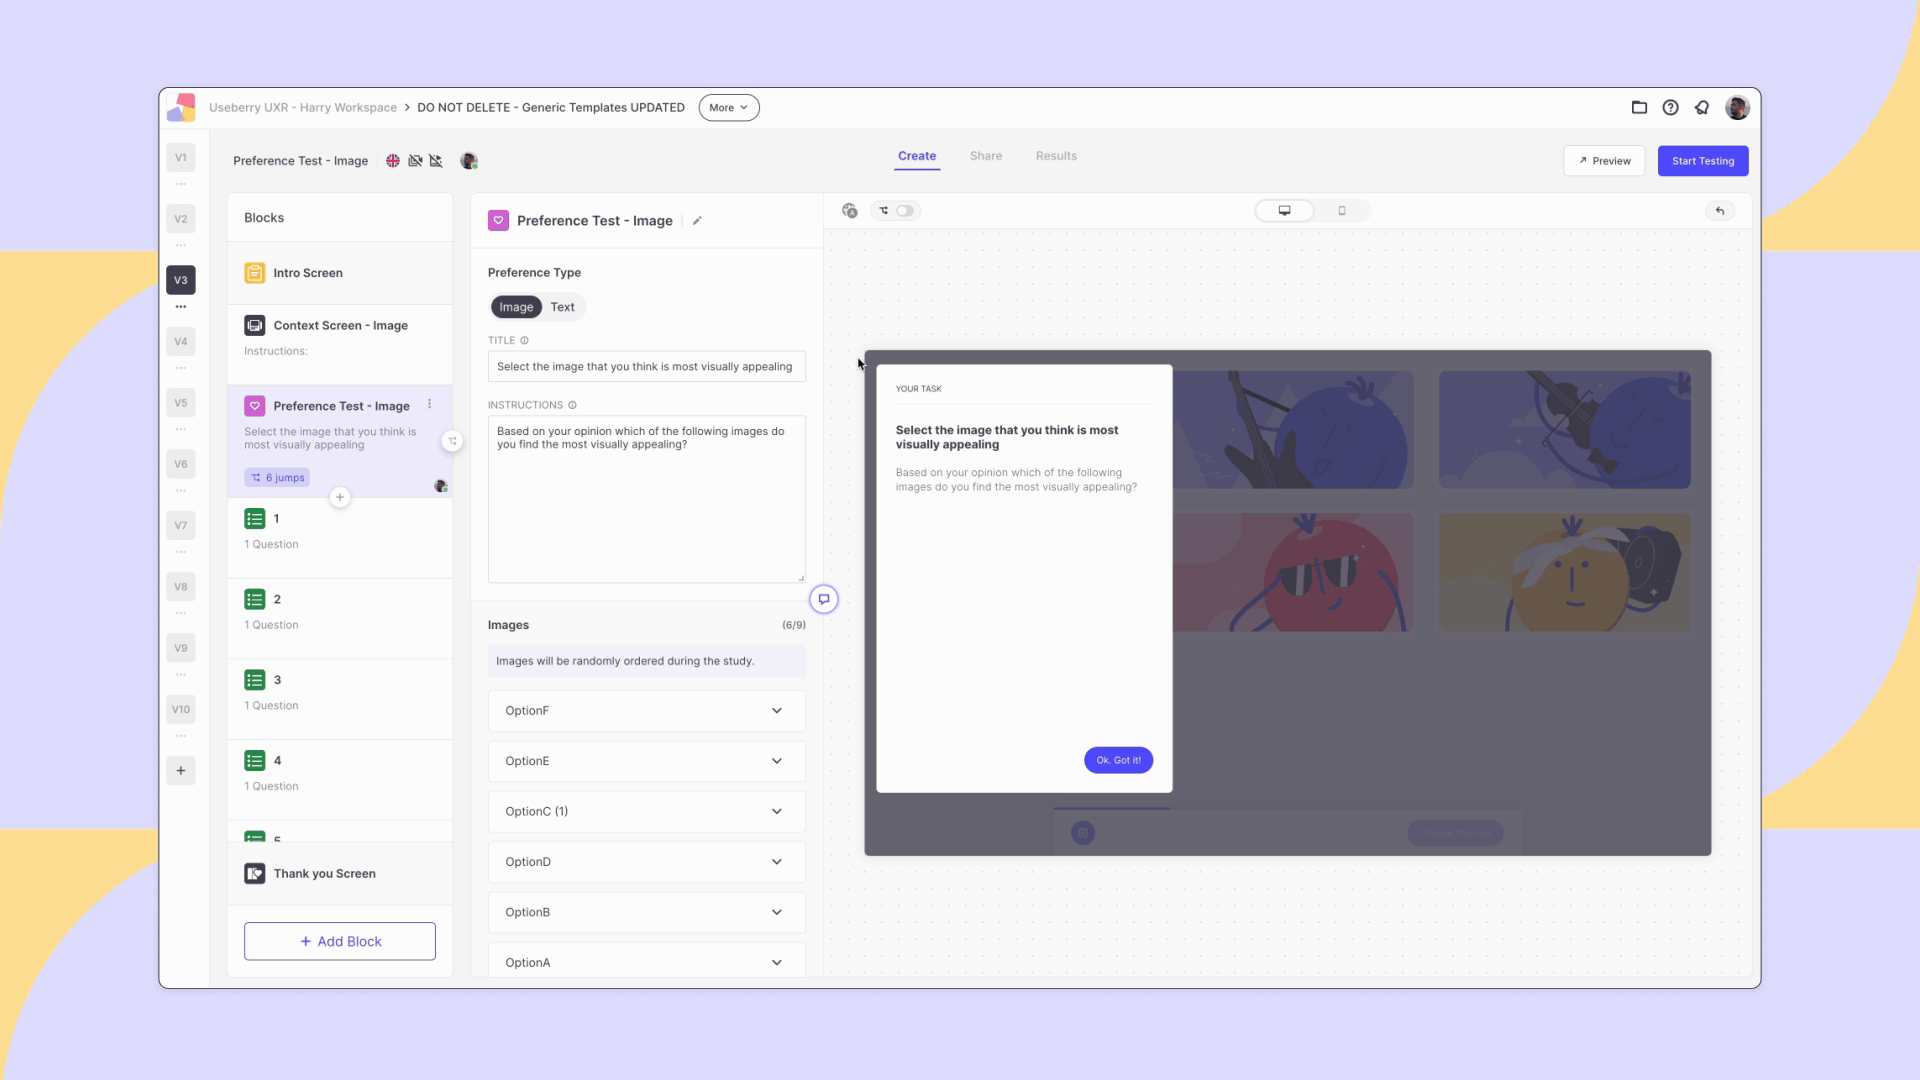 UX research study preview with Jump Mode feature. This feature lets you preview the "jumps" you have set from one block to the next, emulating the user's journey throughout the study.